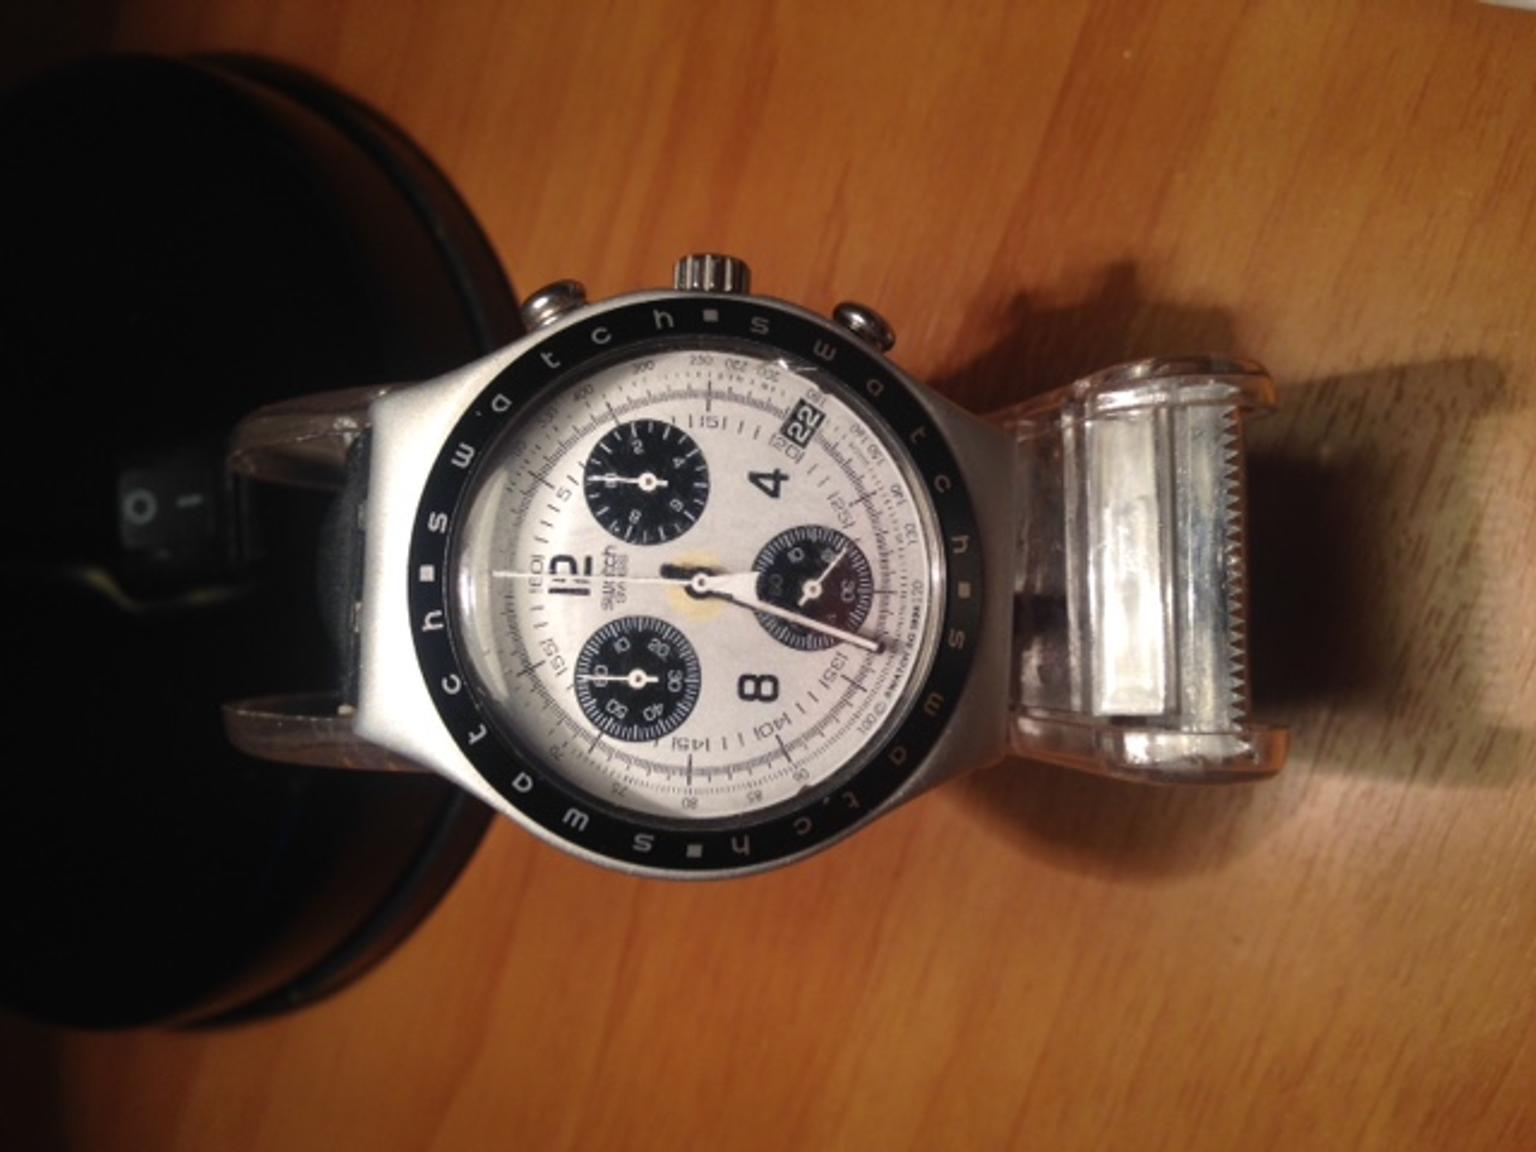 Swatch adrenaline ycs4001gc 1998 chrono in 10153 Turin for €35.00 